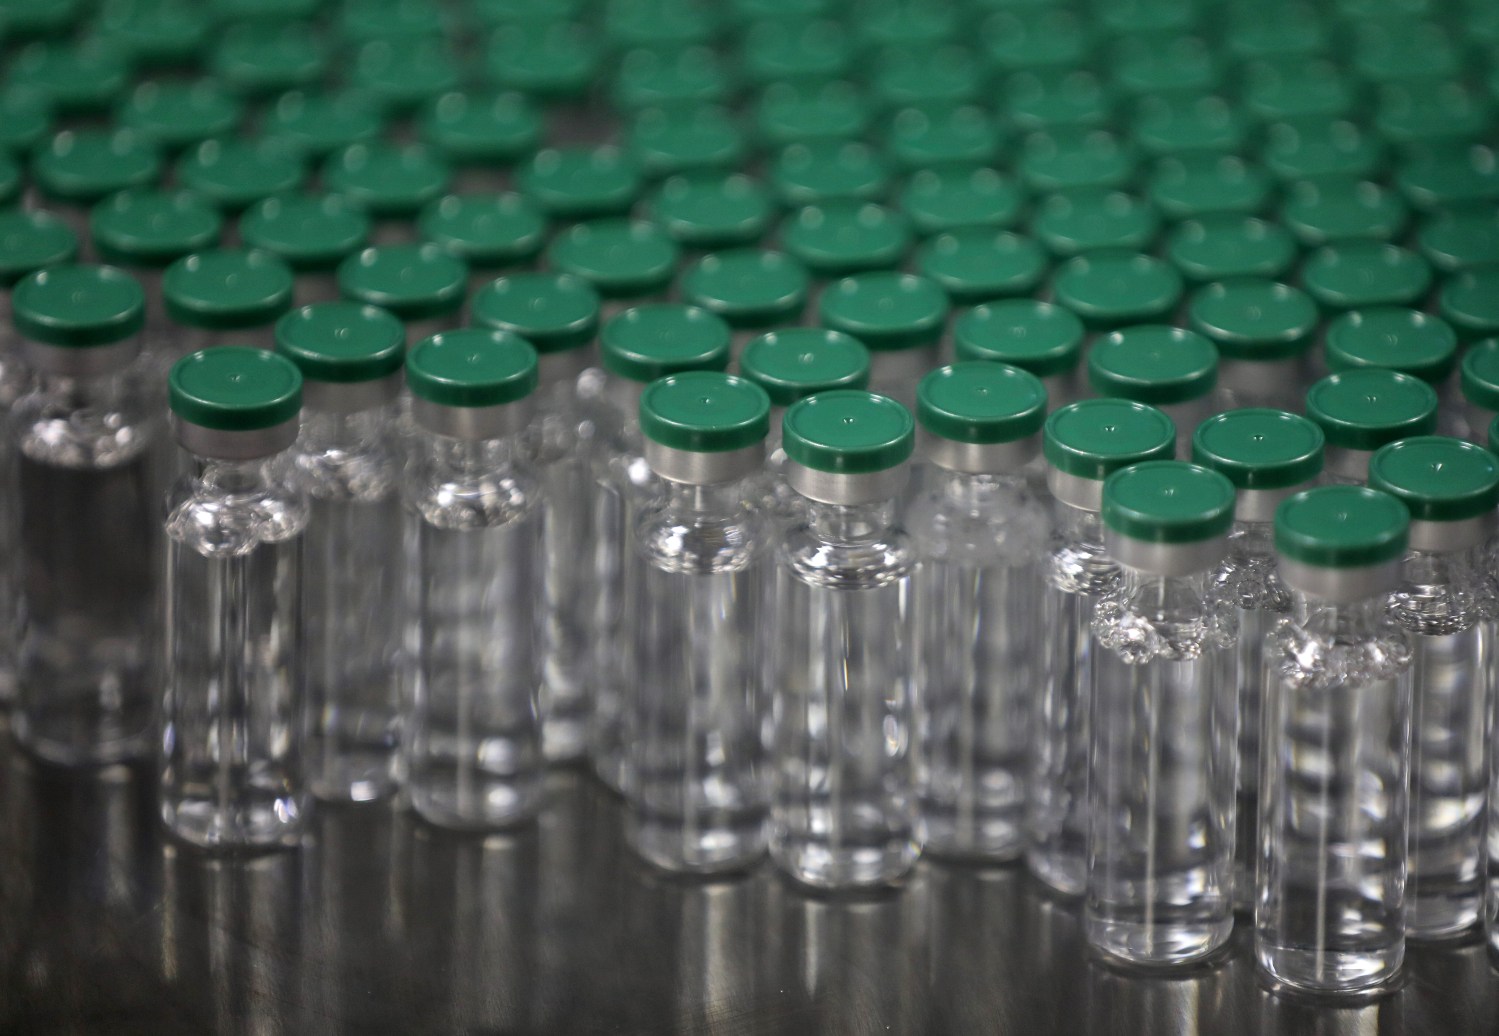 Vials of AstraZeneca's COVISHIELD, coronavirus disease (COVID-19) vaccine, are seen before they are packaged inside a lab at Serum Institute of India, Pune, India, November 30, 2020.  Picture taken November 30, 2020. REUTERS/Francis Mascarenhas